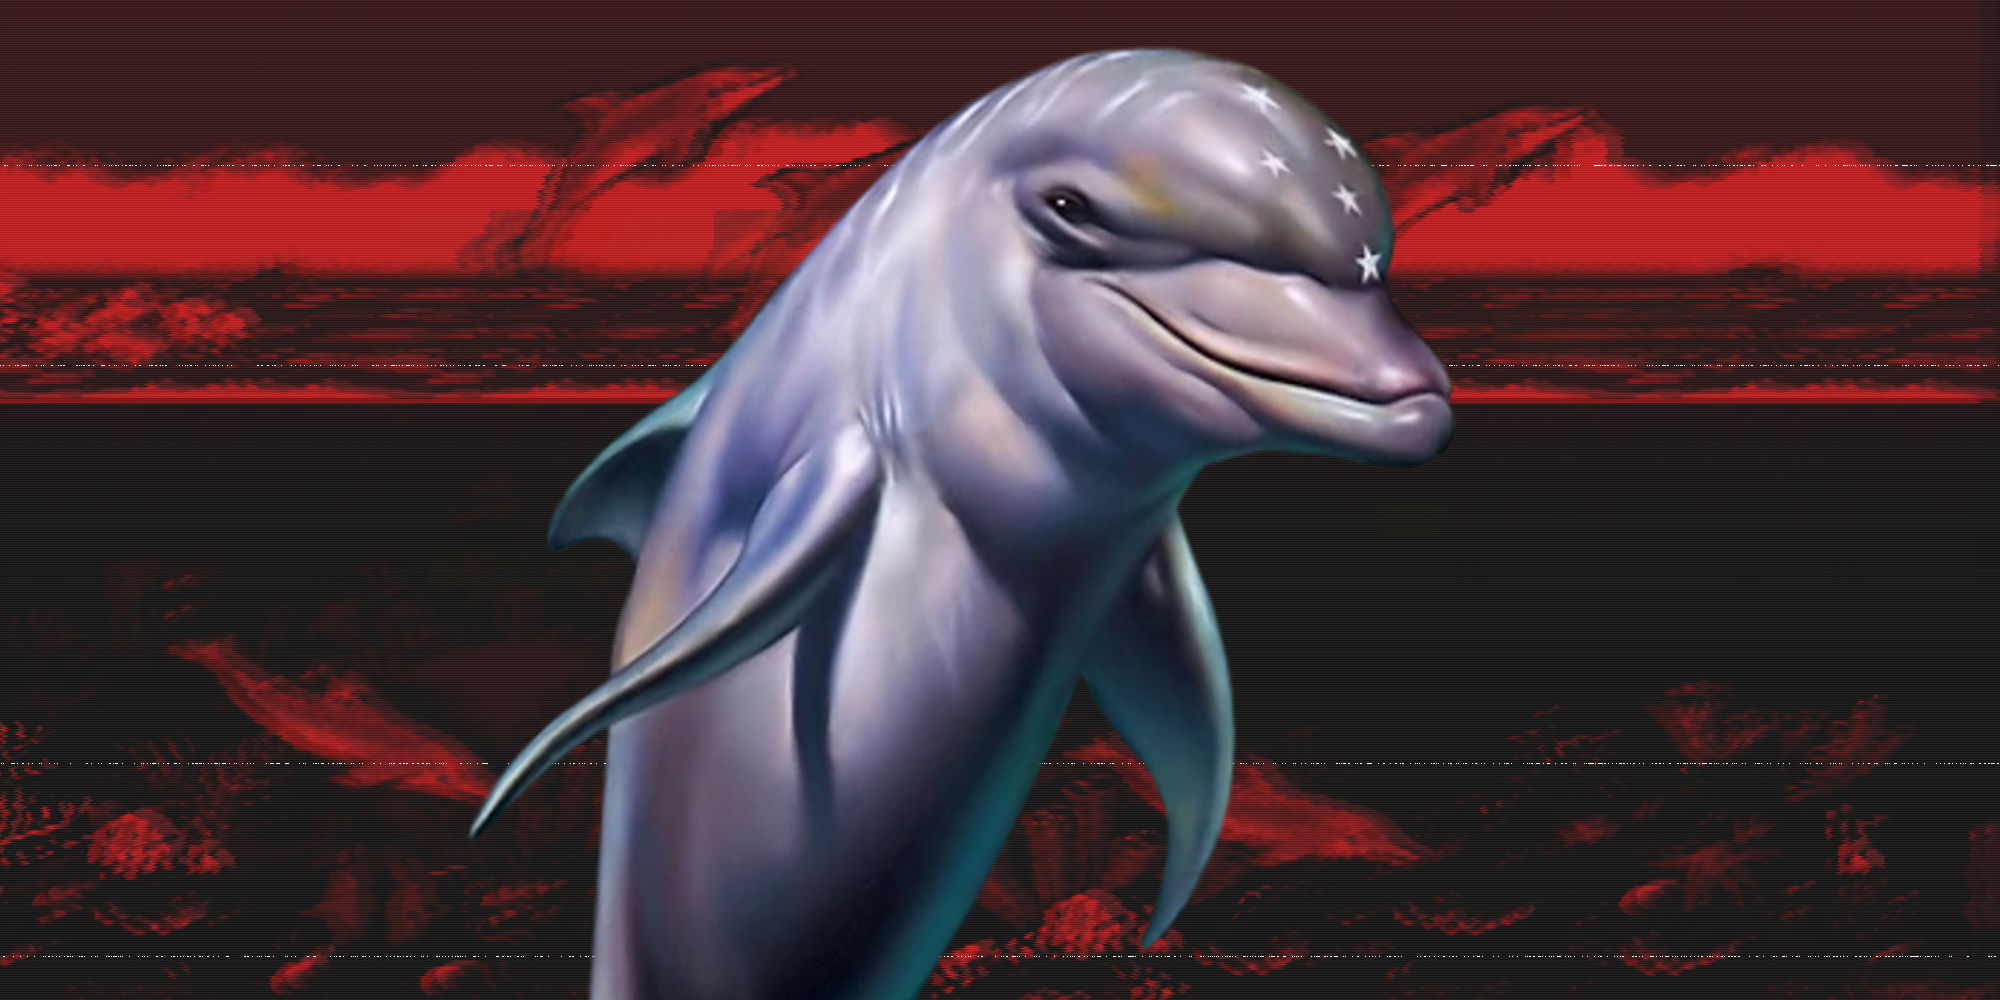 A red distorted background with Ecco The Dolphin over top